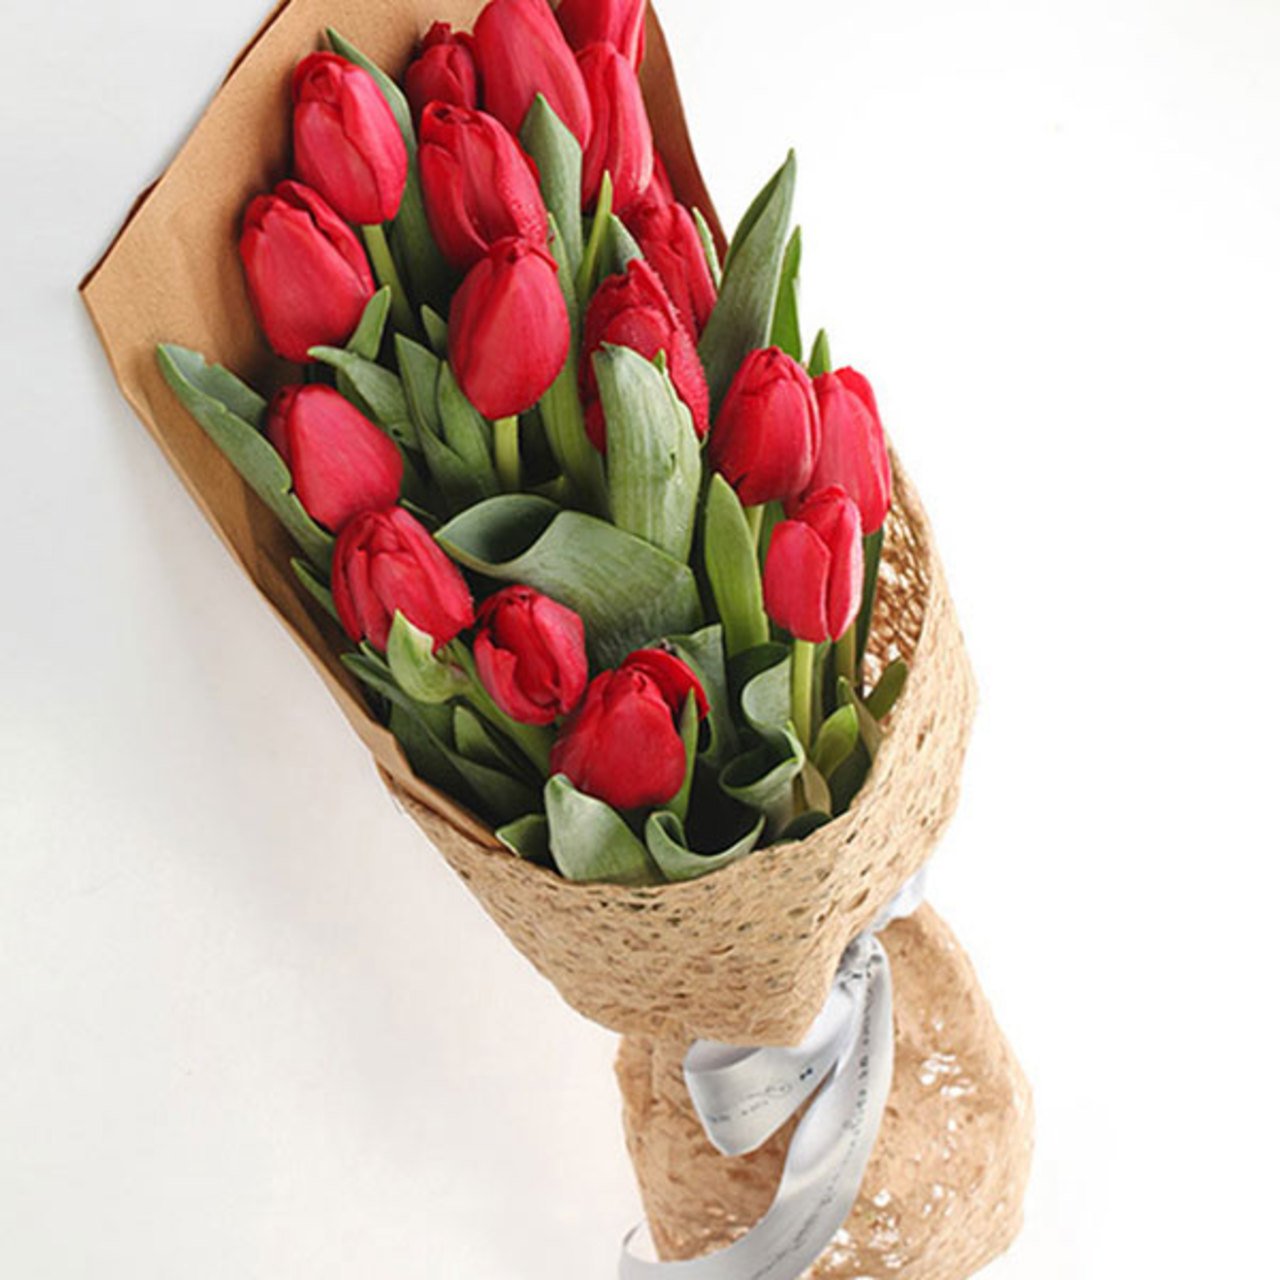 Love by my side(
A selection of 19 superb red tulips. (Tulips are seasonal flowers-